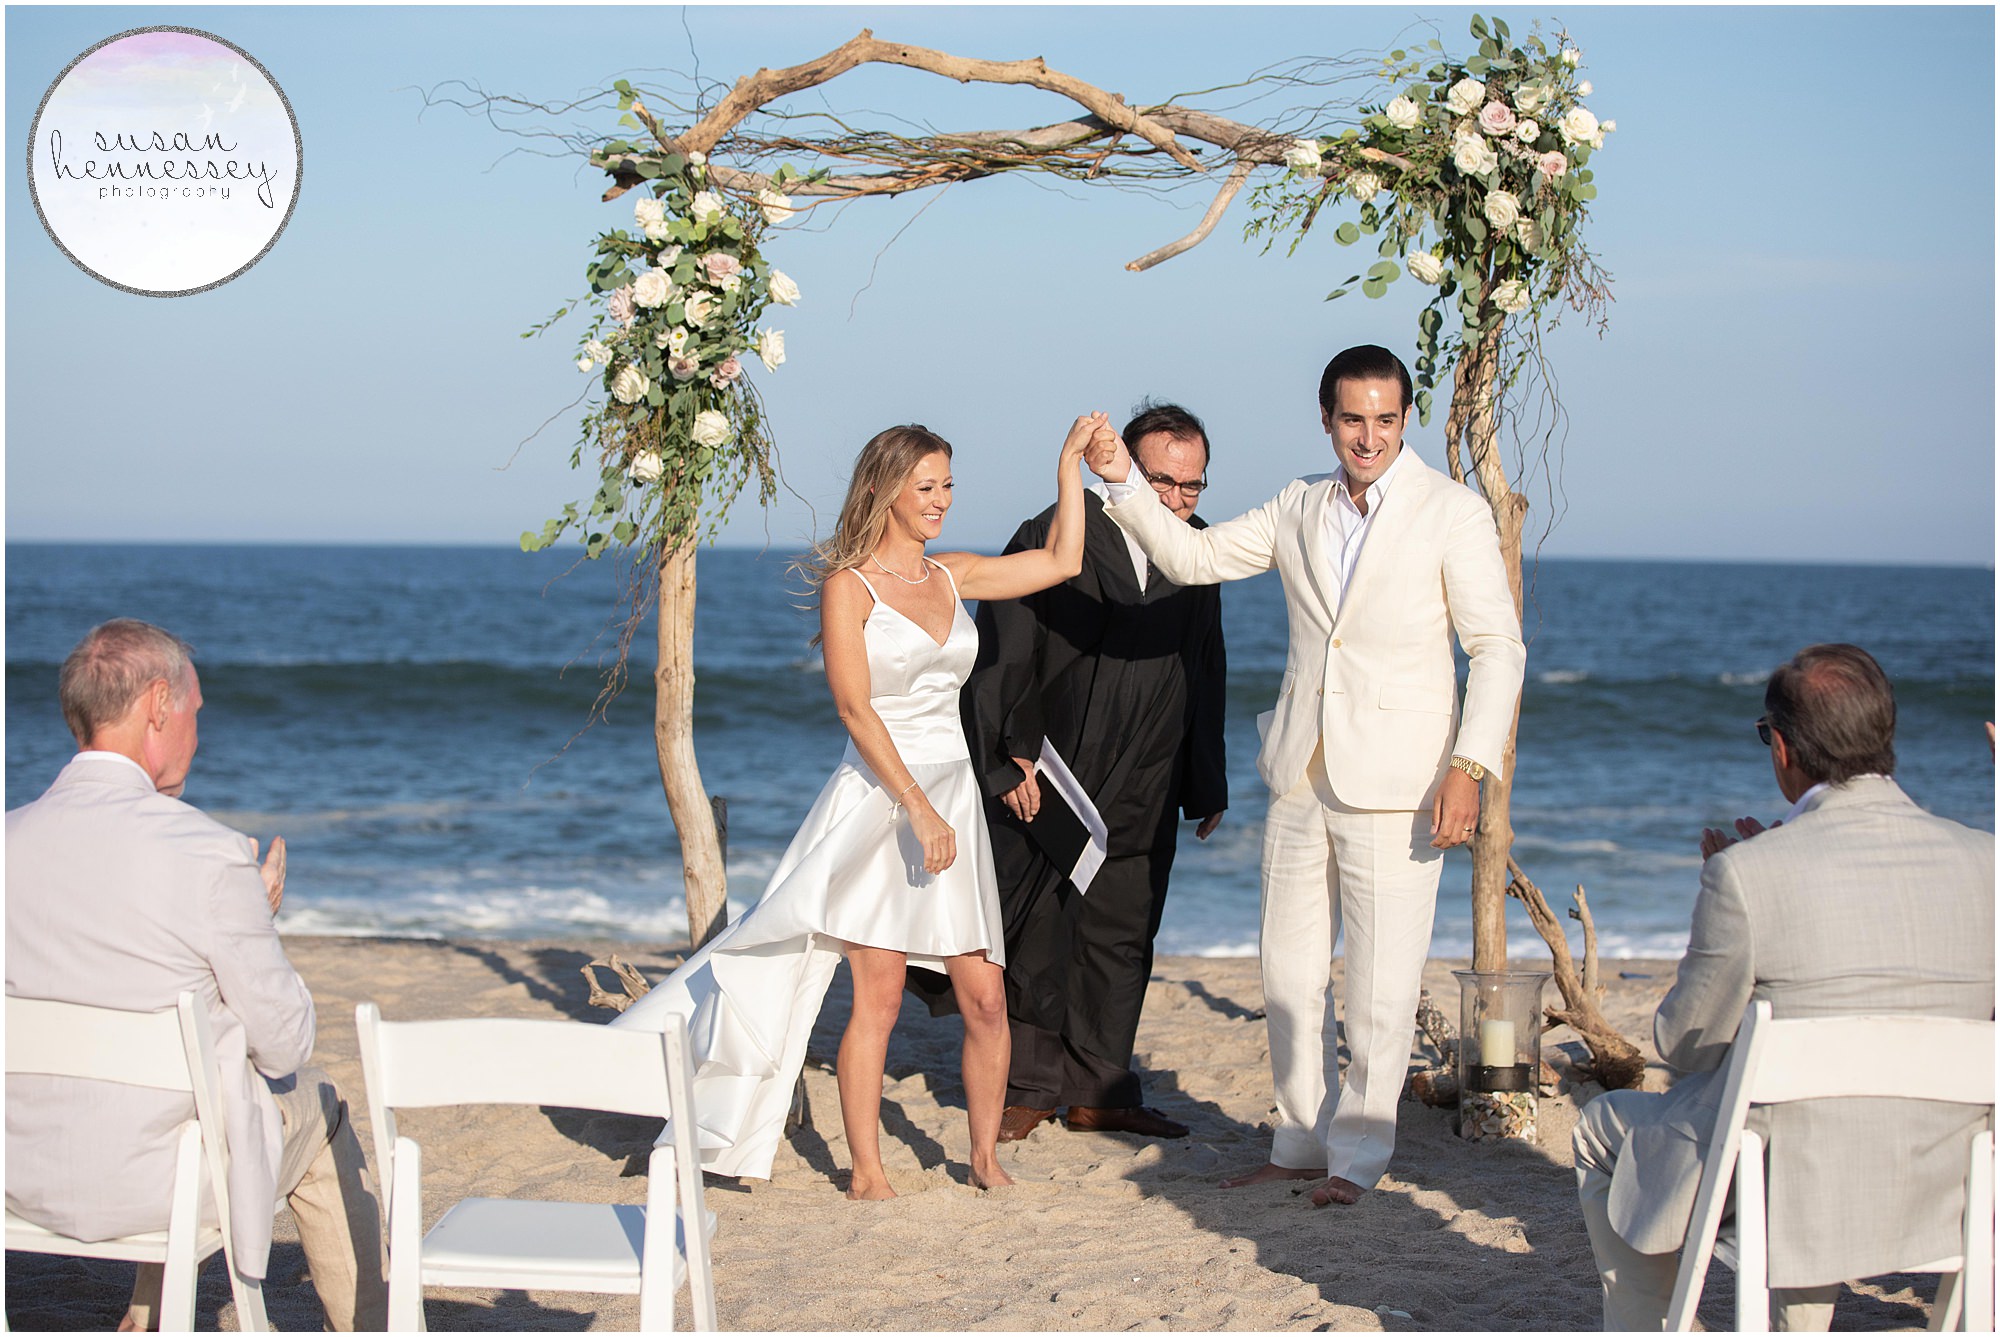 A ceremony on the beach in Bay Head